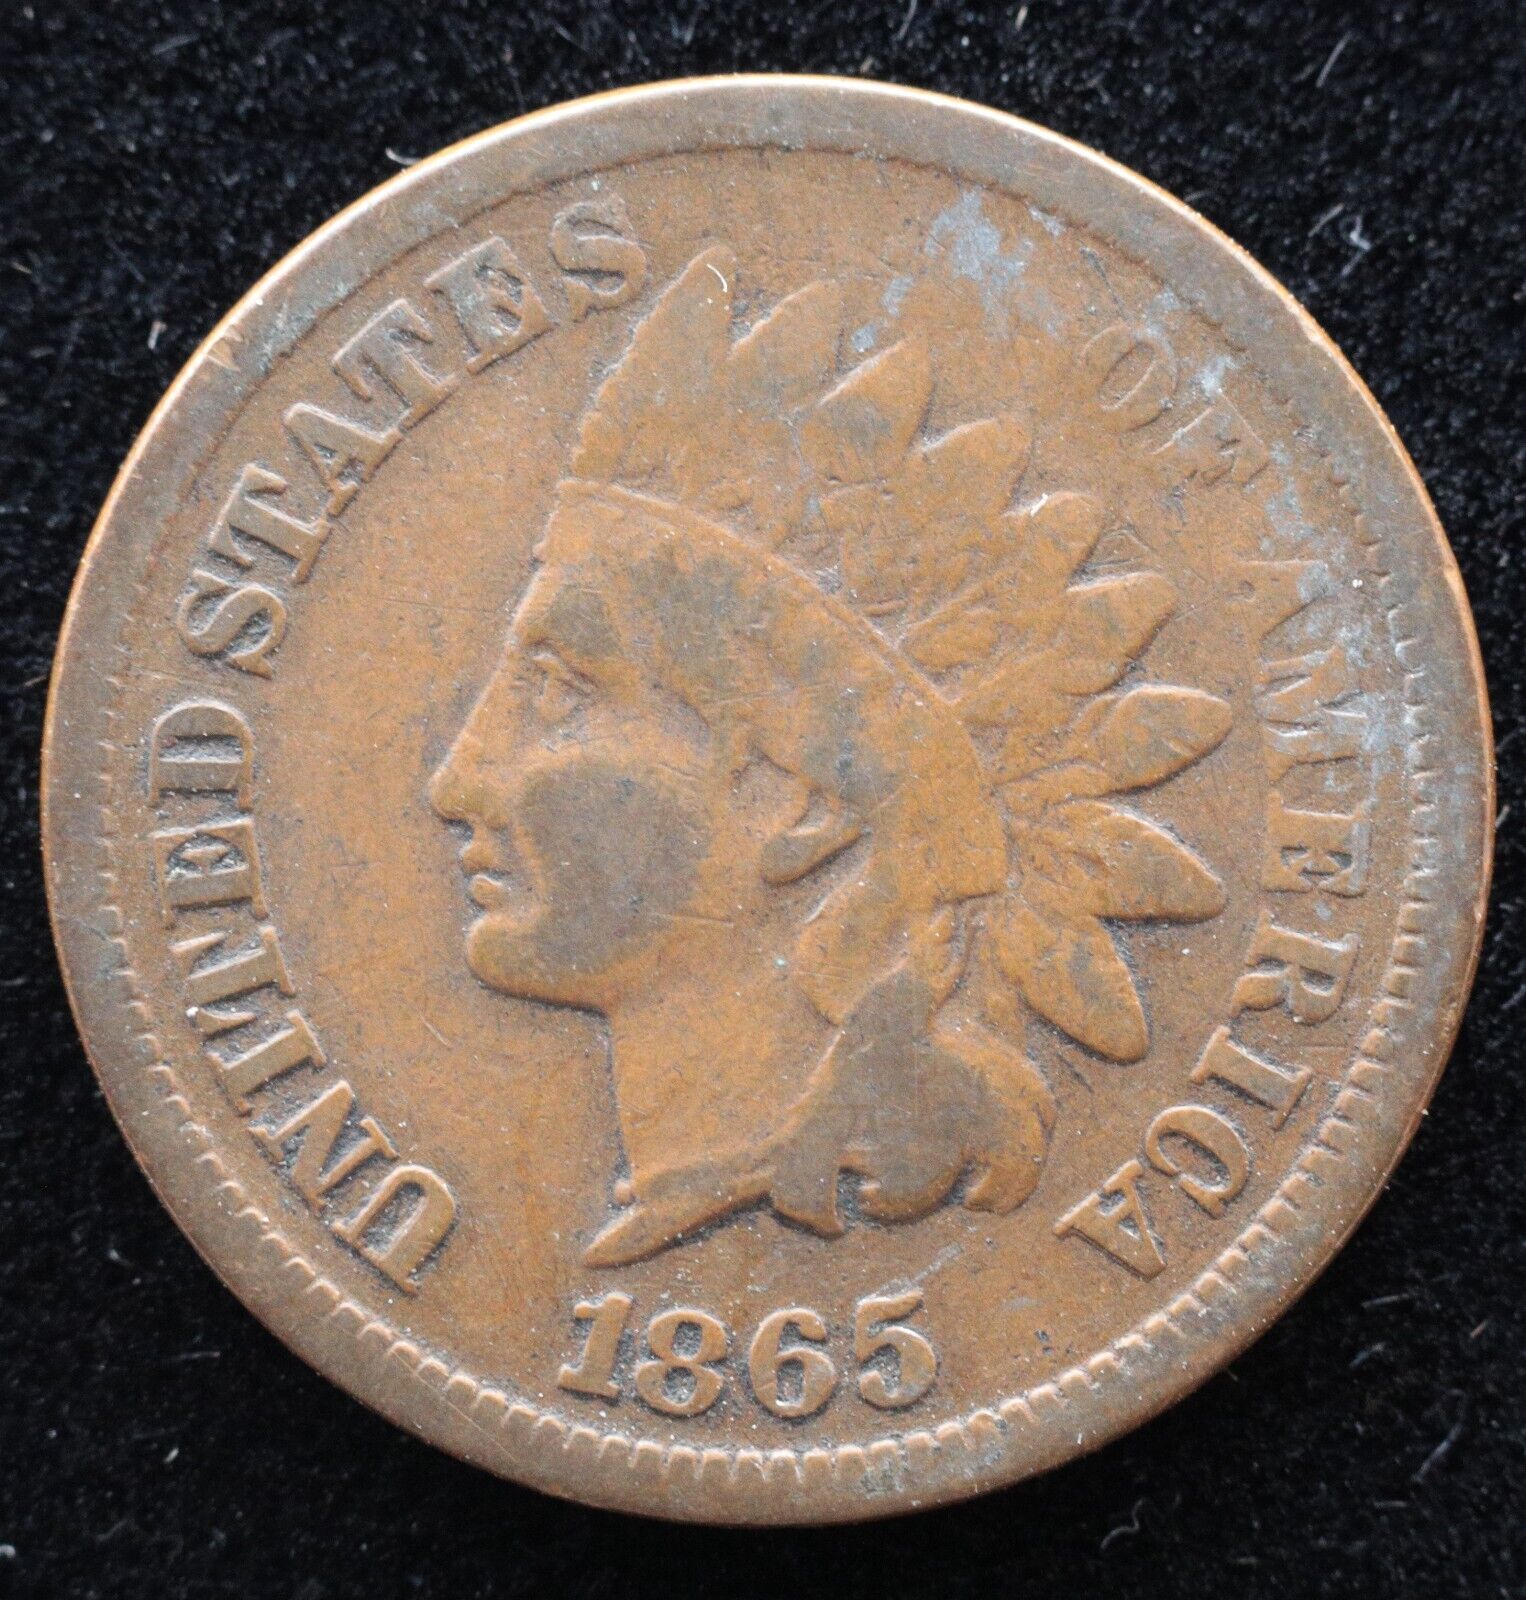 KAPPYSCOINS G8449   1864 BZ G / VG CIVIL WAR USED AND DATED  INDIAN HEAD CENT